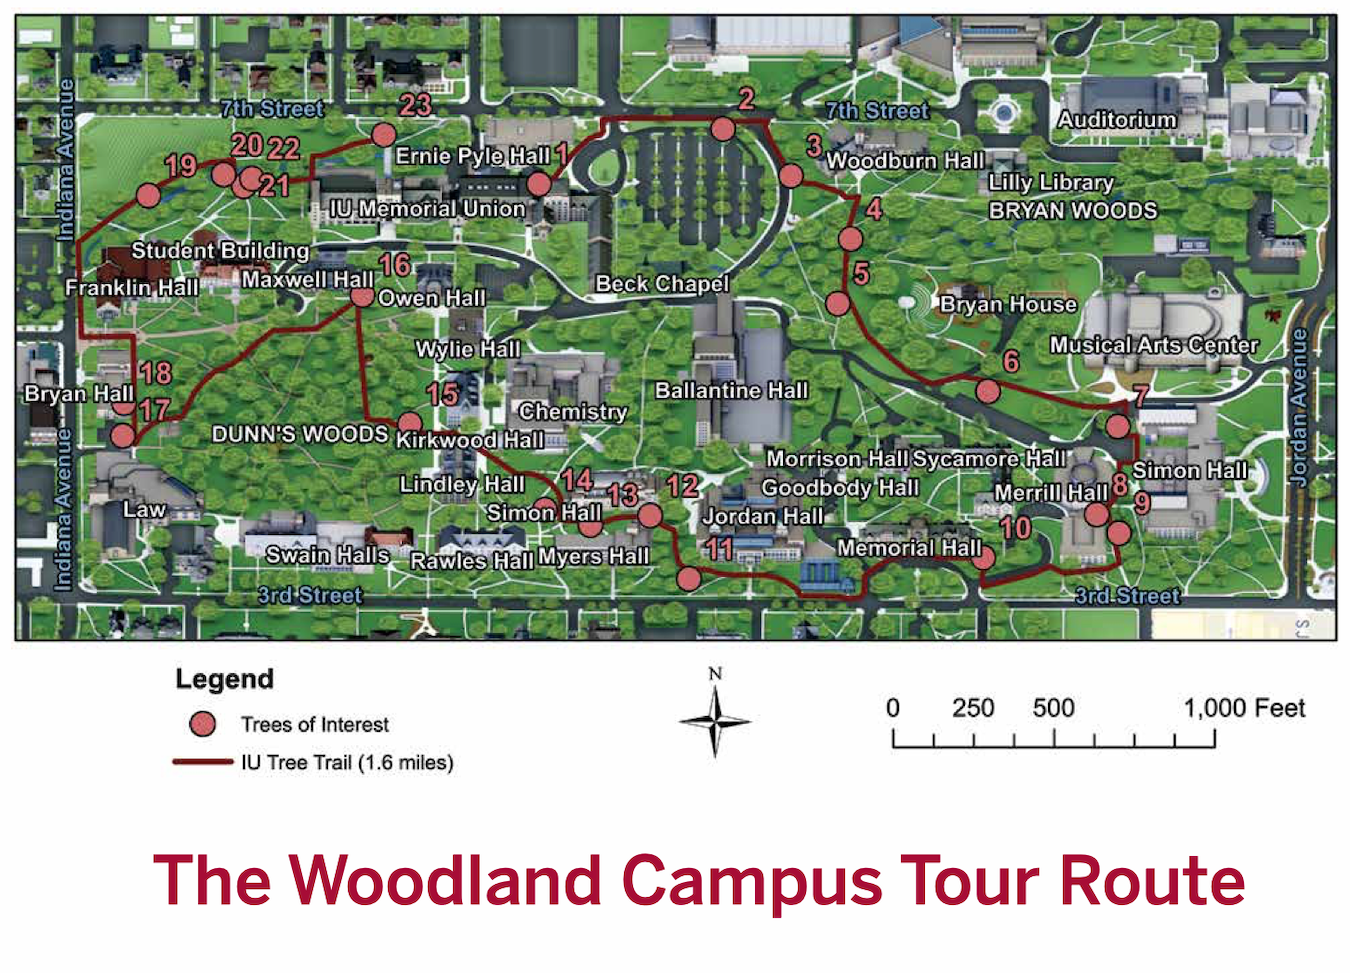 Sarah Mincey, clinical associate professor in the IU O’Neill School of Public and Environmental Affairs, co-authored the brochure “<a href="https://urbanforestry.indiana.edu/outreach/woodland.pdf" target="_blank">The Woodland Campus</a>,” which includes a historic walking guide to IU trees. 